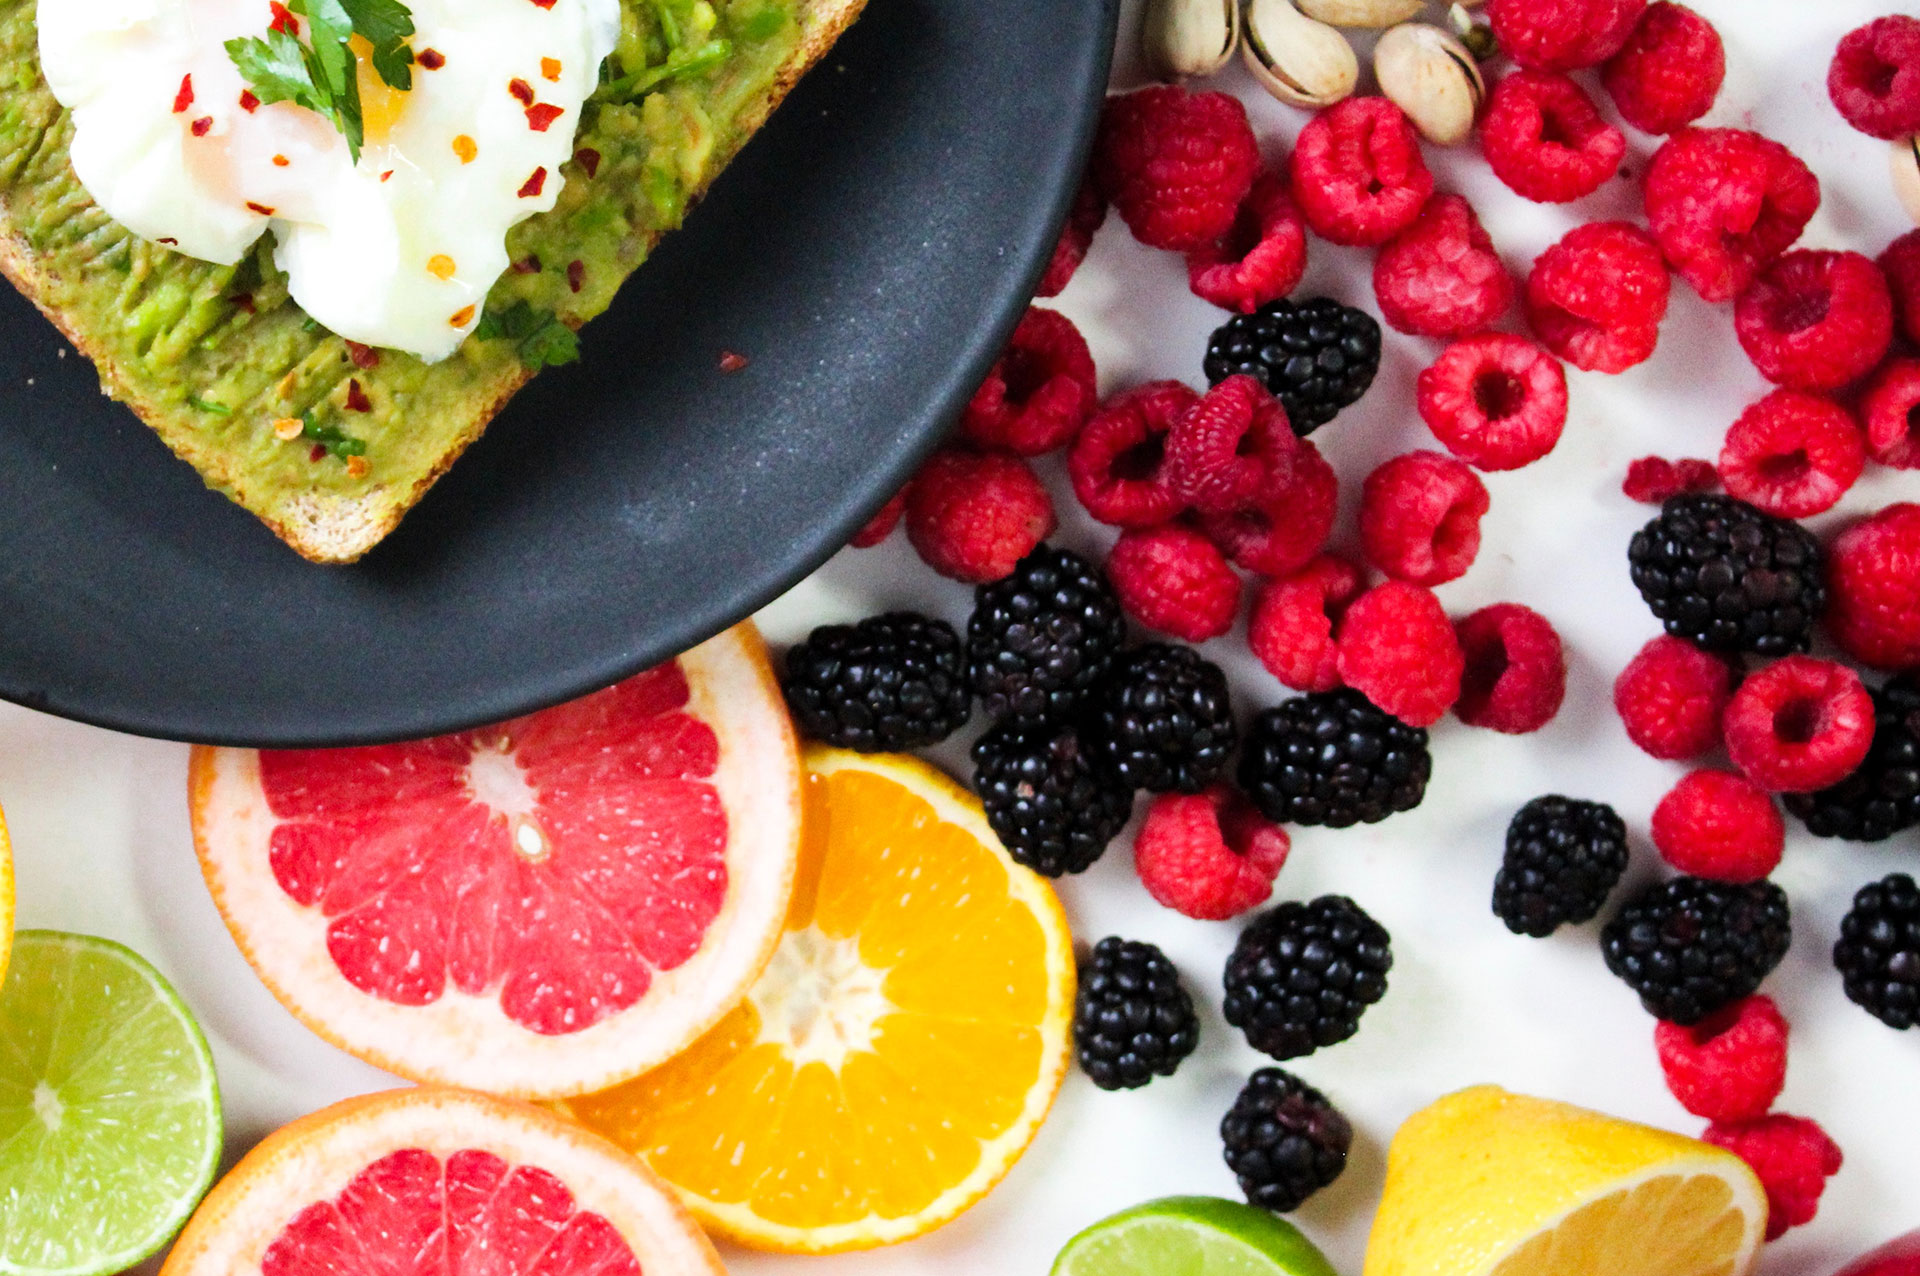 Healthy food with fruits and roast with a healthy spread and an egg